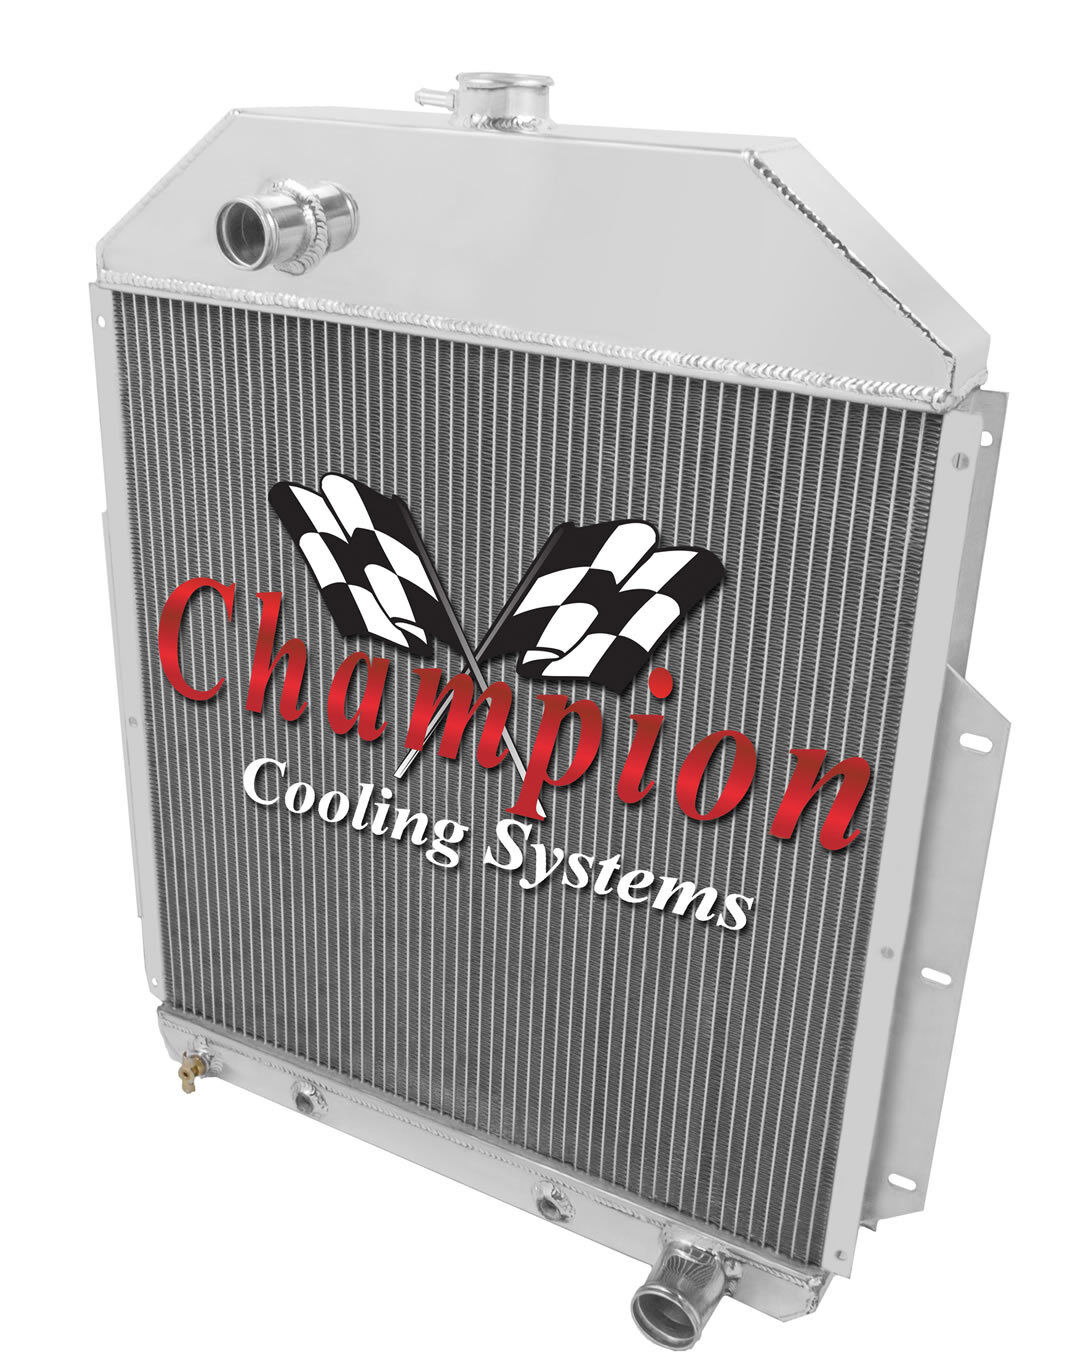 4 Row Discount Champion Radiator for 1942 - 1952 Ford Truck Chevy Conversion